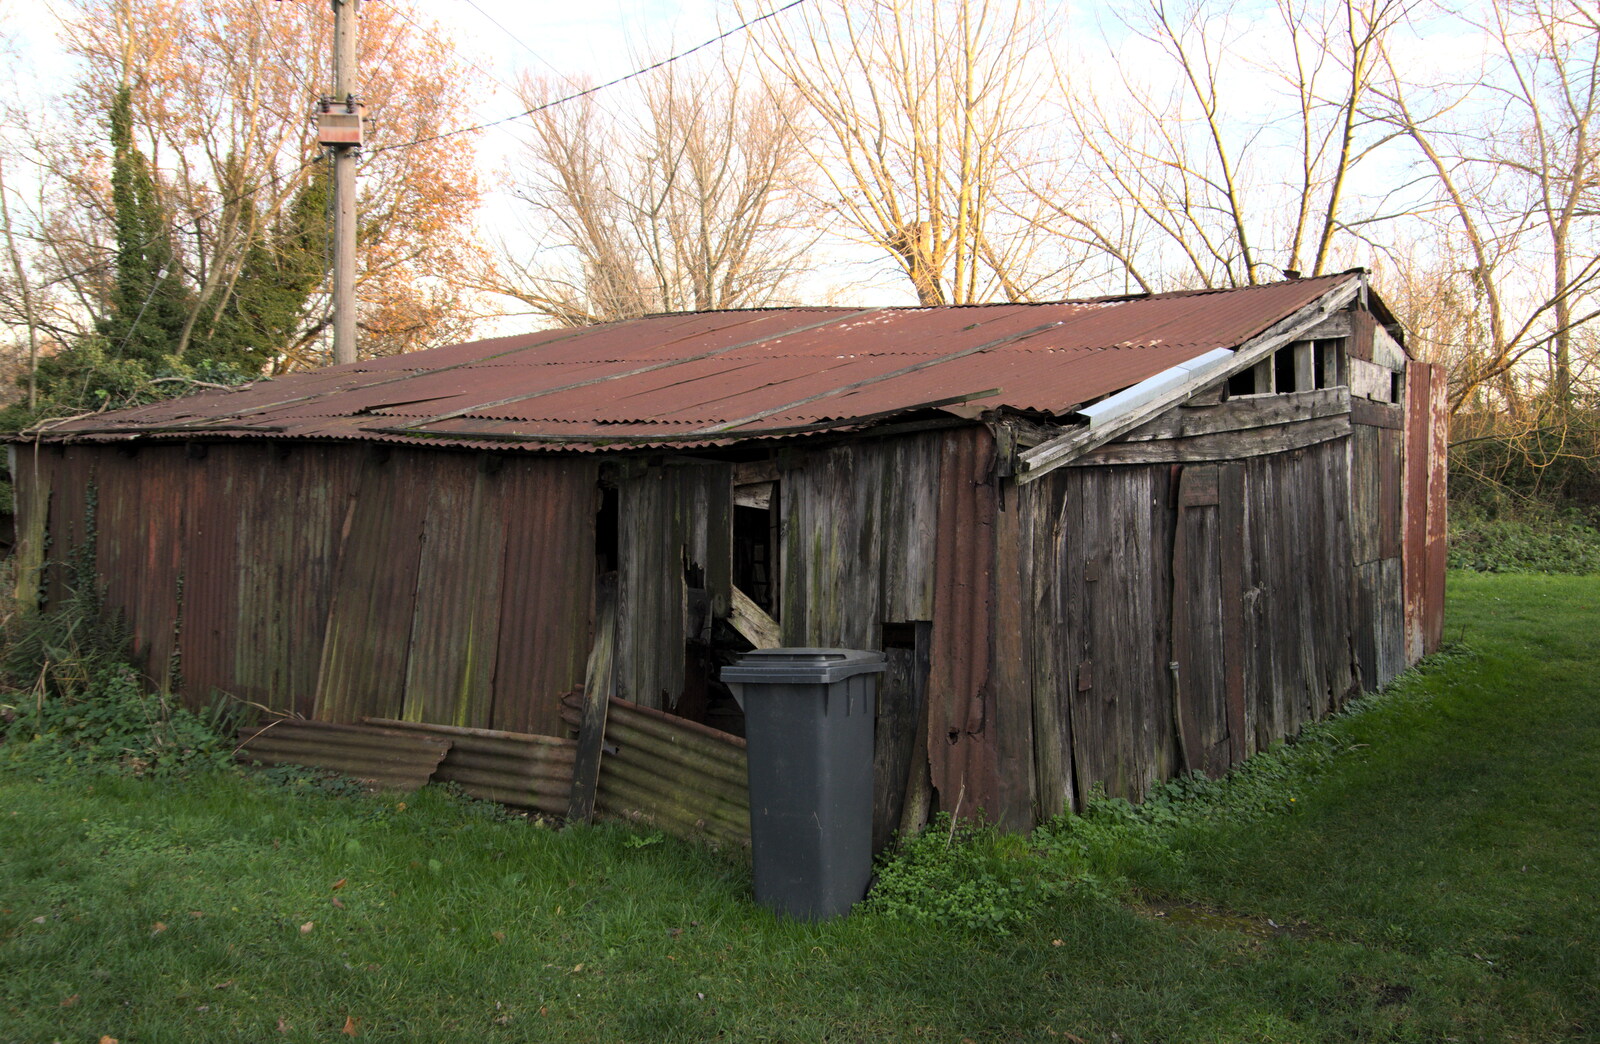 A ramshackle corrugated-iron shed from The Dereliction of Eye, Suffolk - 22nd November 2020